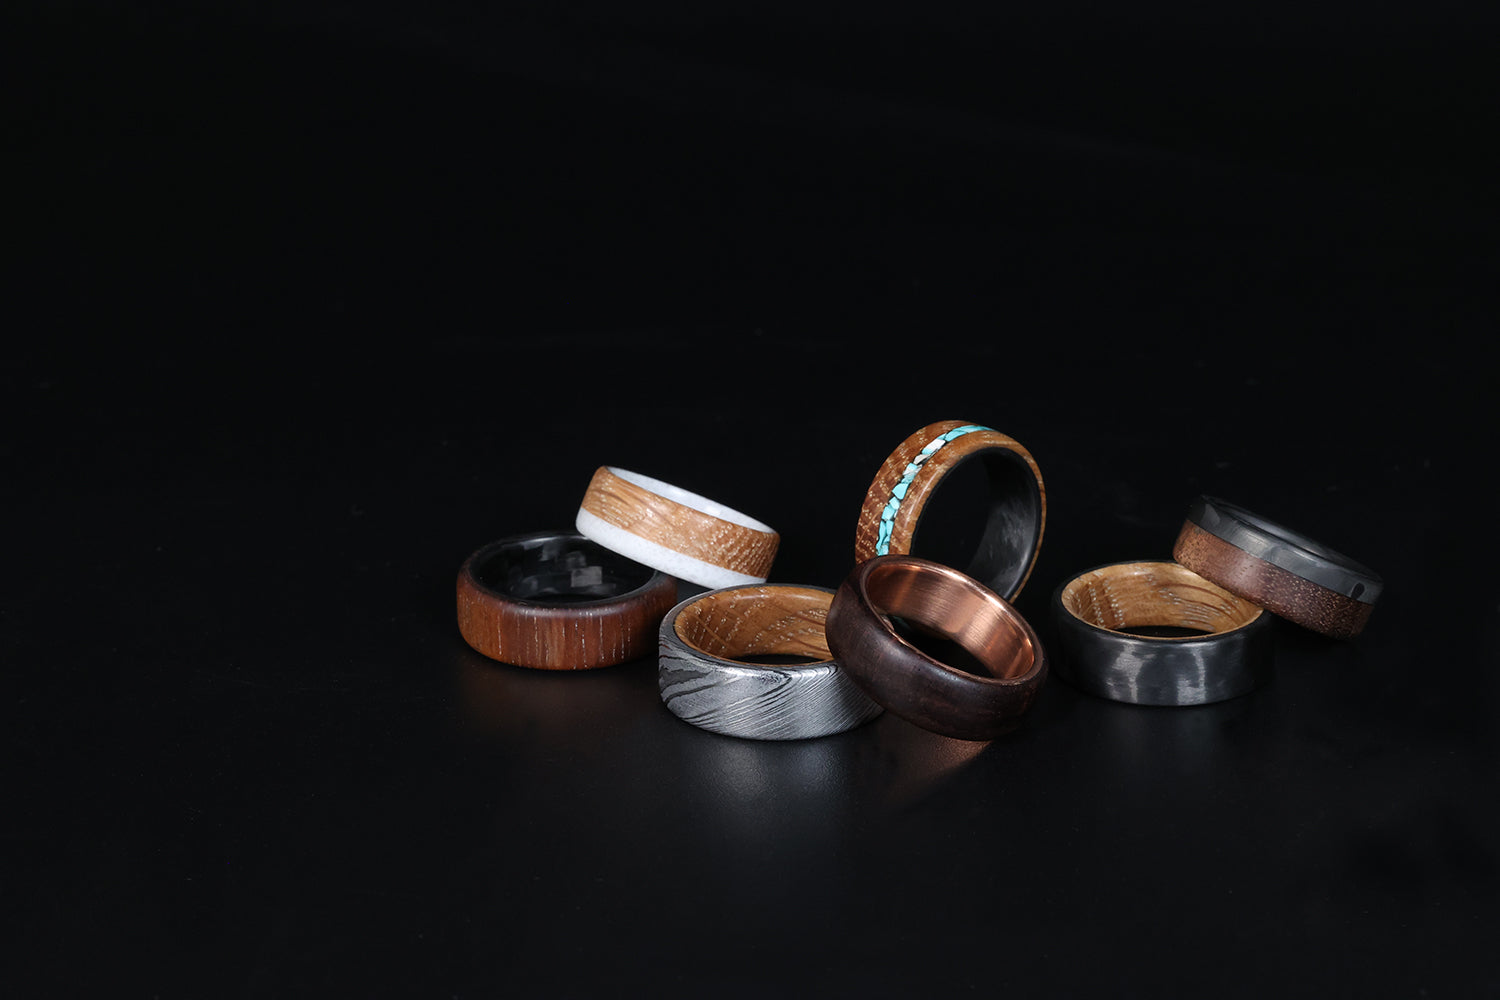 Men's Wooden Wedding Rings and Bands